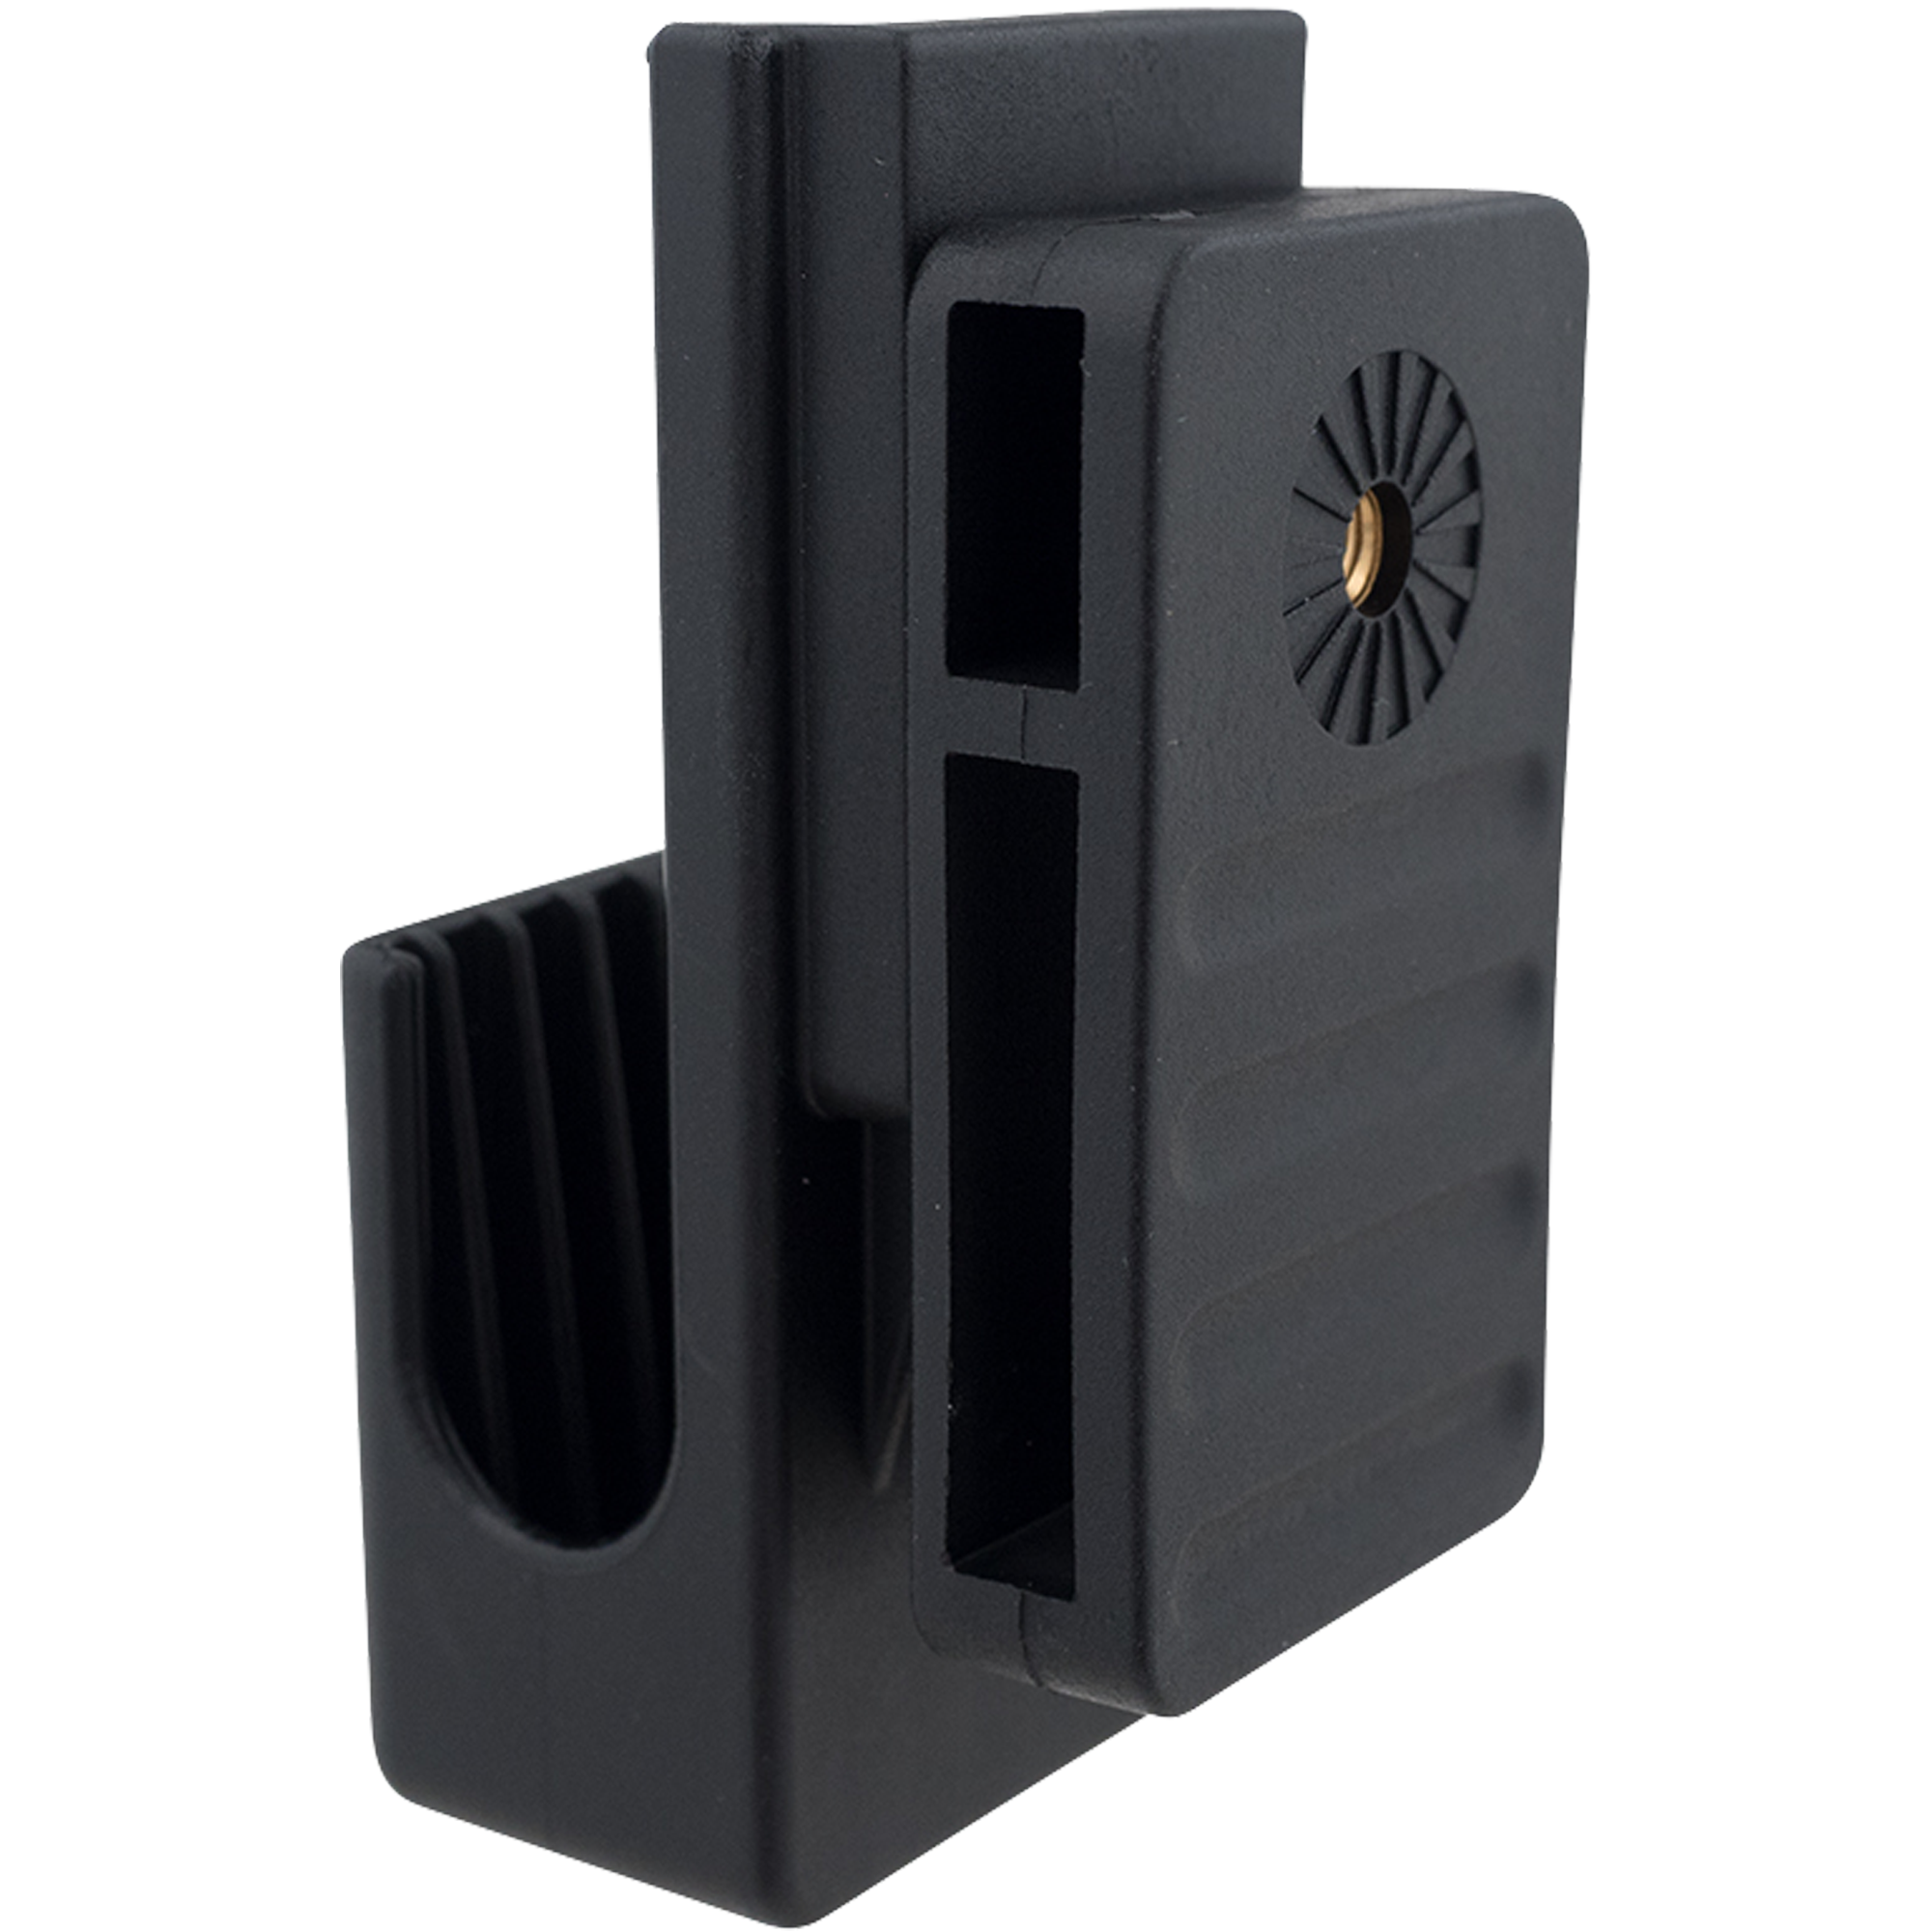 Double Stack Competition Magnetic Magazine Pouch fits 2011 Magazines